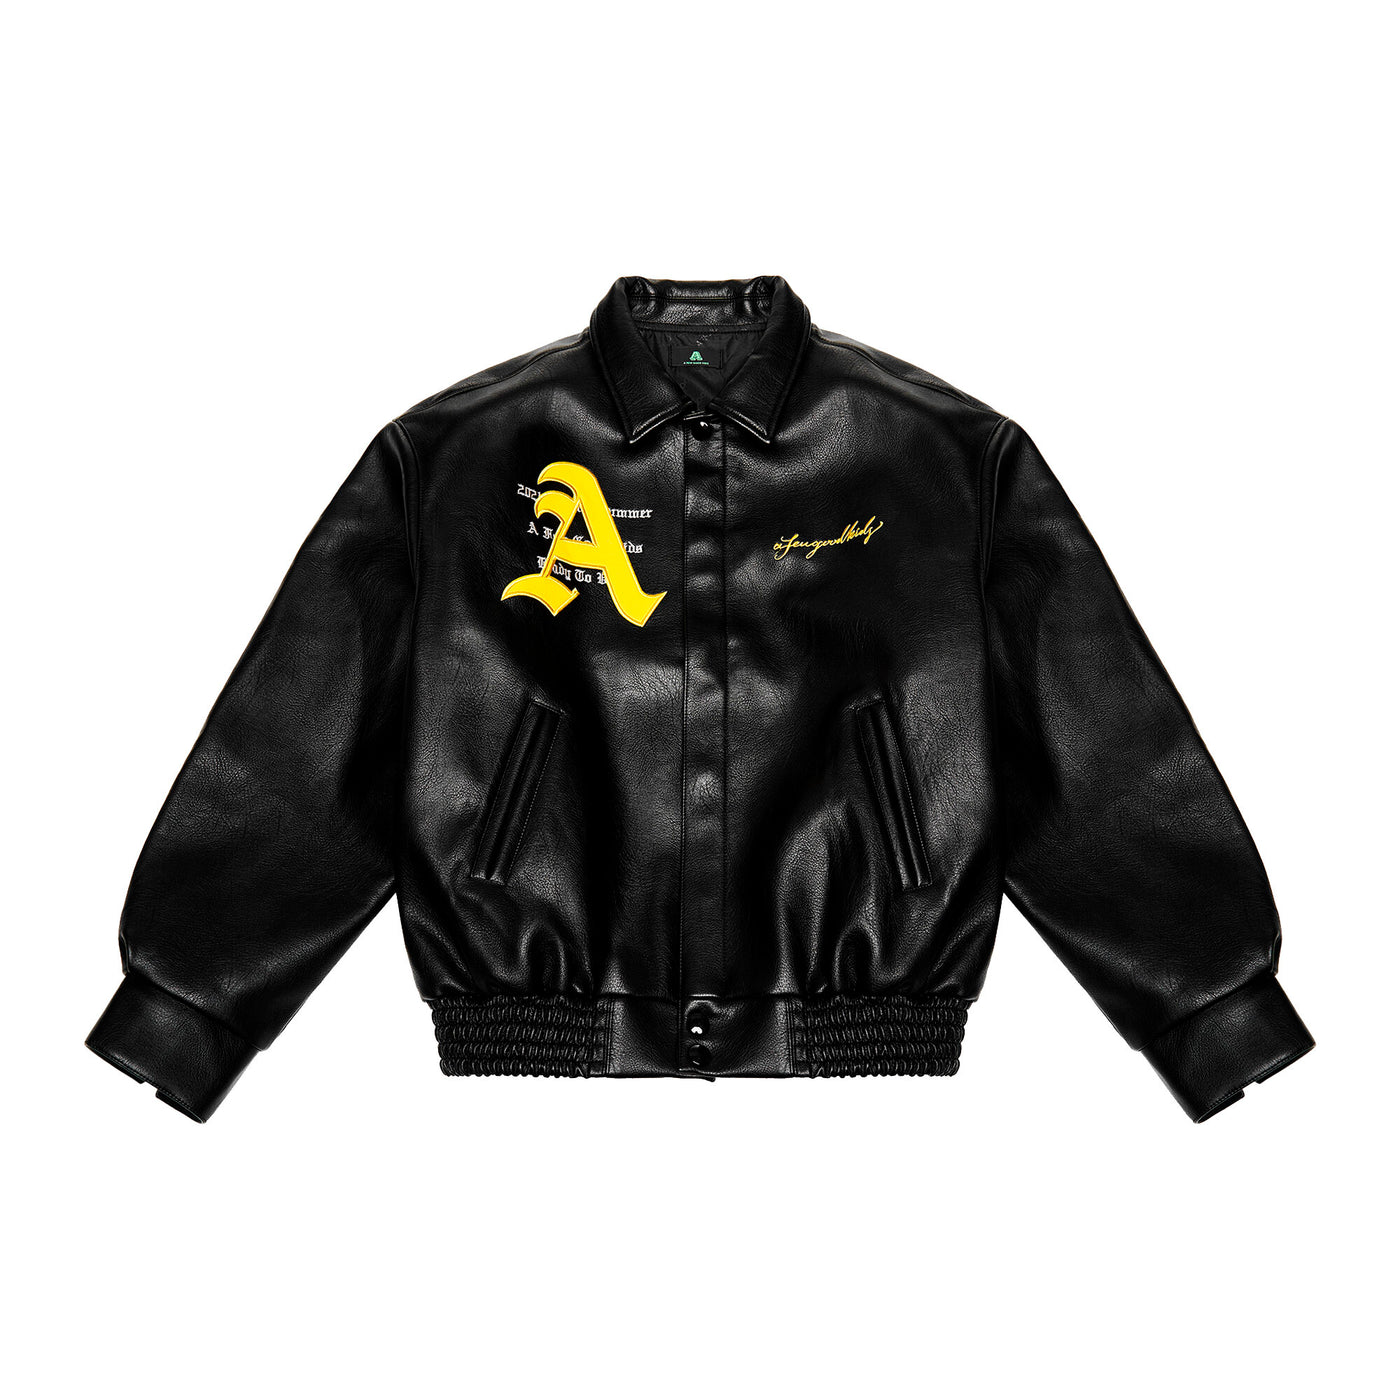 AFGK RACING LEATHER JACKET DONCARE XLサイズ - スタジャン